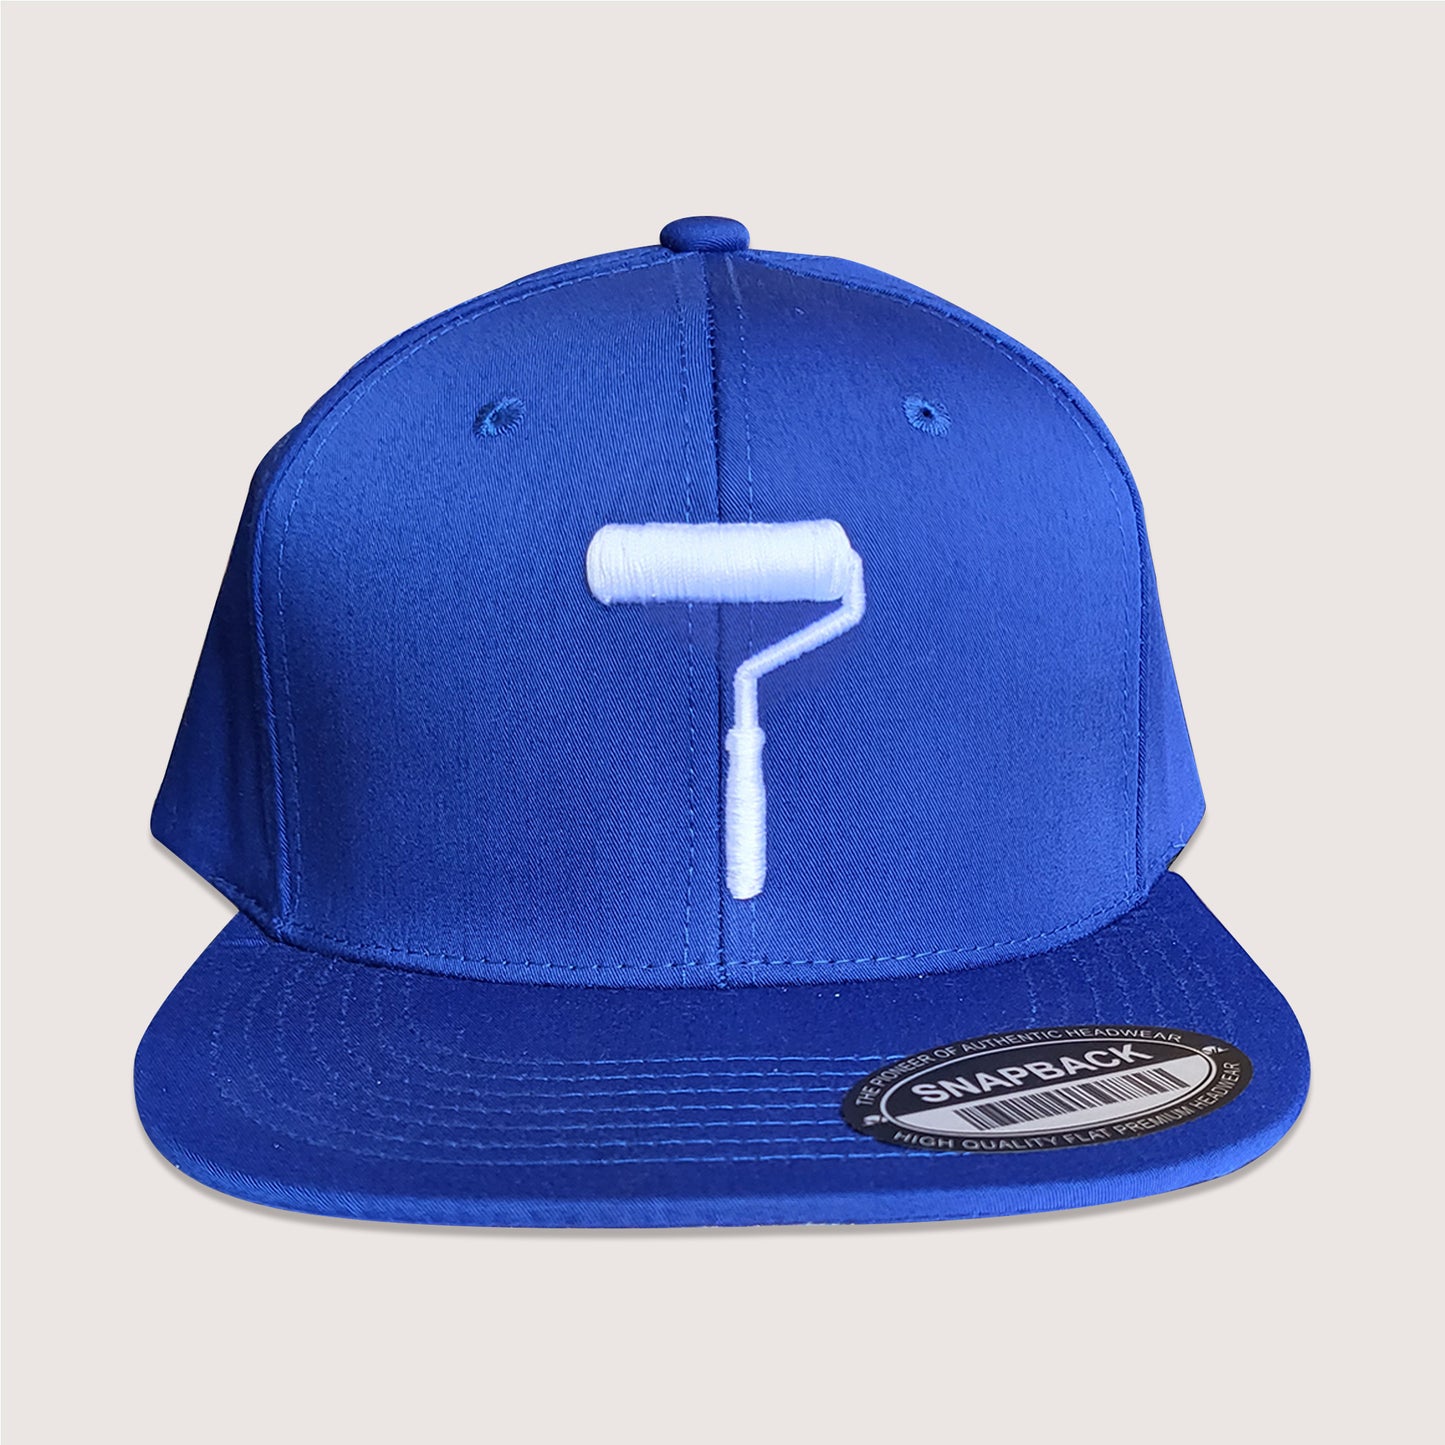 Phatcaps graffiti brand dodger blue baseball cap paint roller with white embroidery.